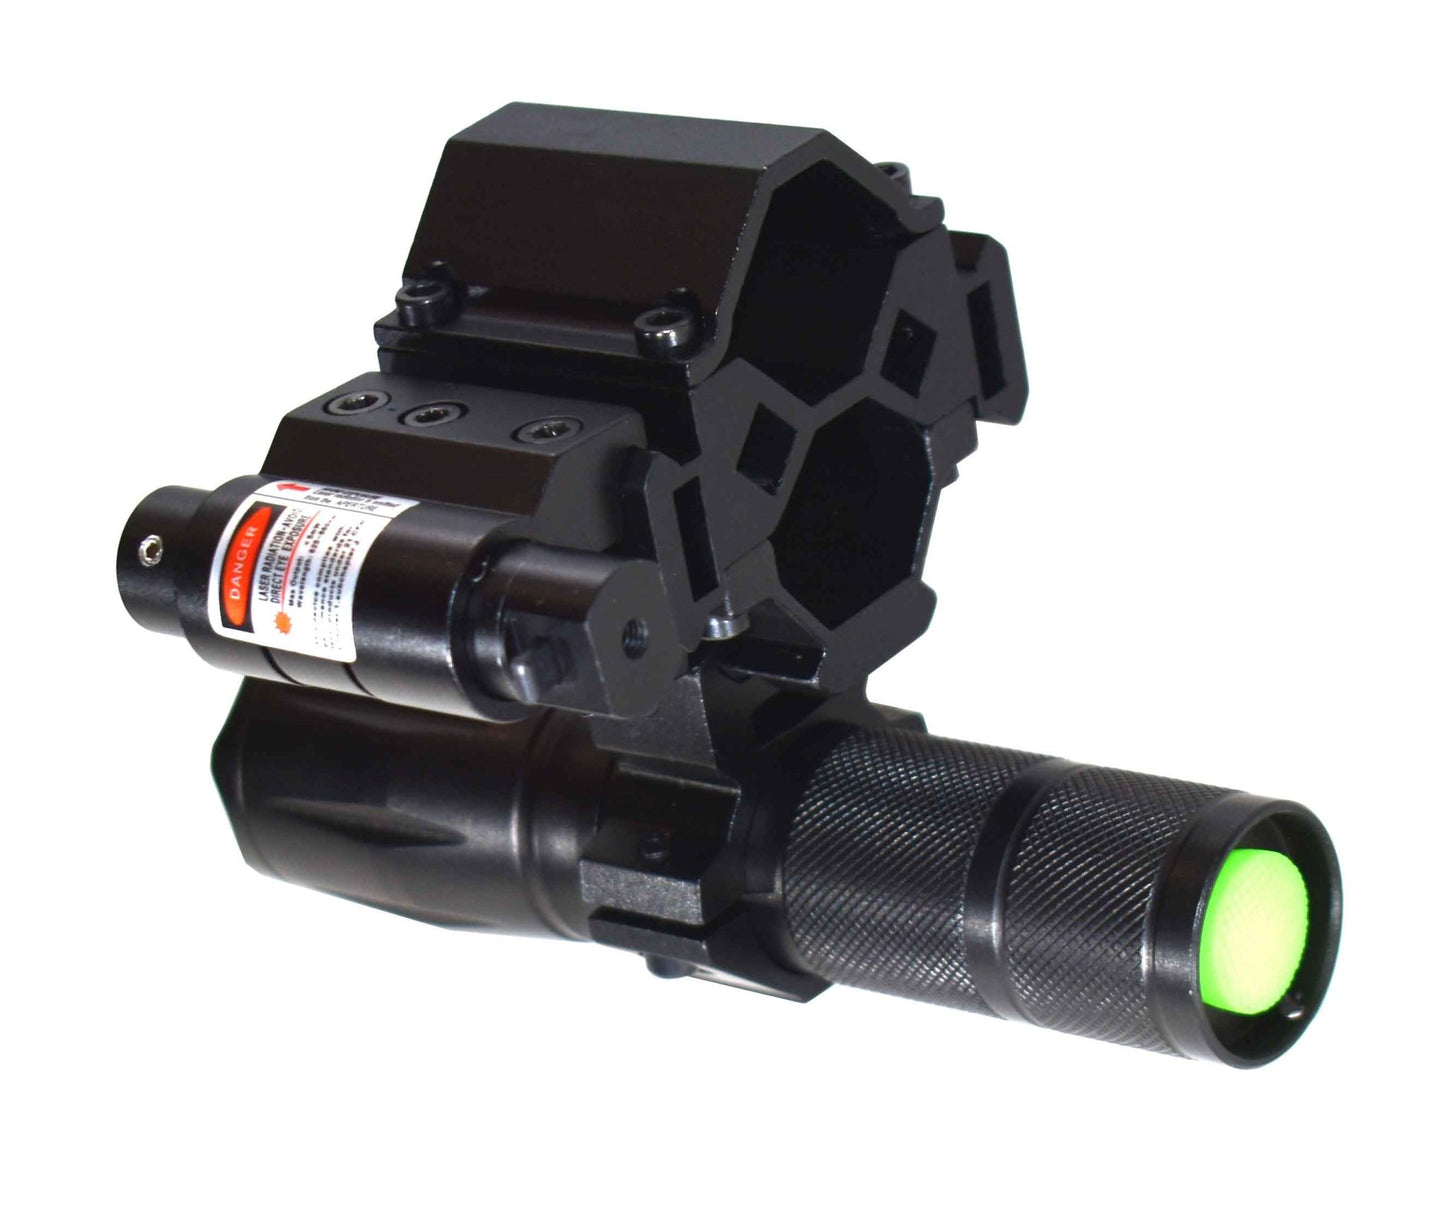 Tactical Flashlight And Red Laser Sight With Magazine Tube/barrel Mount Compatible With 12 Gauge Shotguns. - TRINITY SUPPLY INC